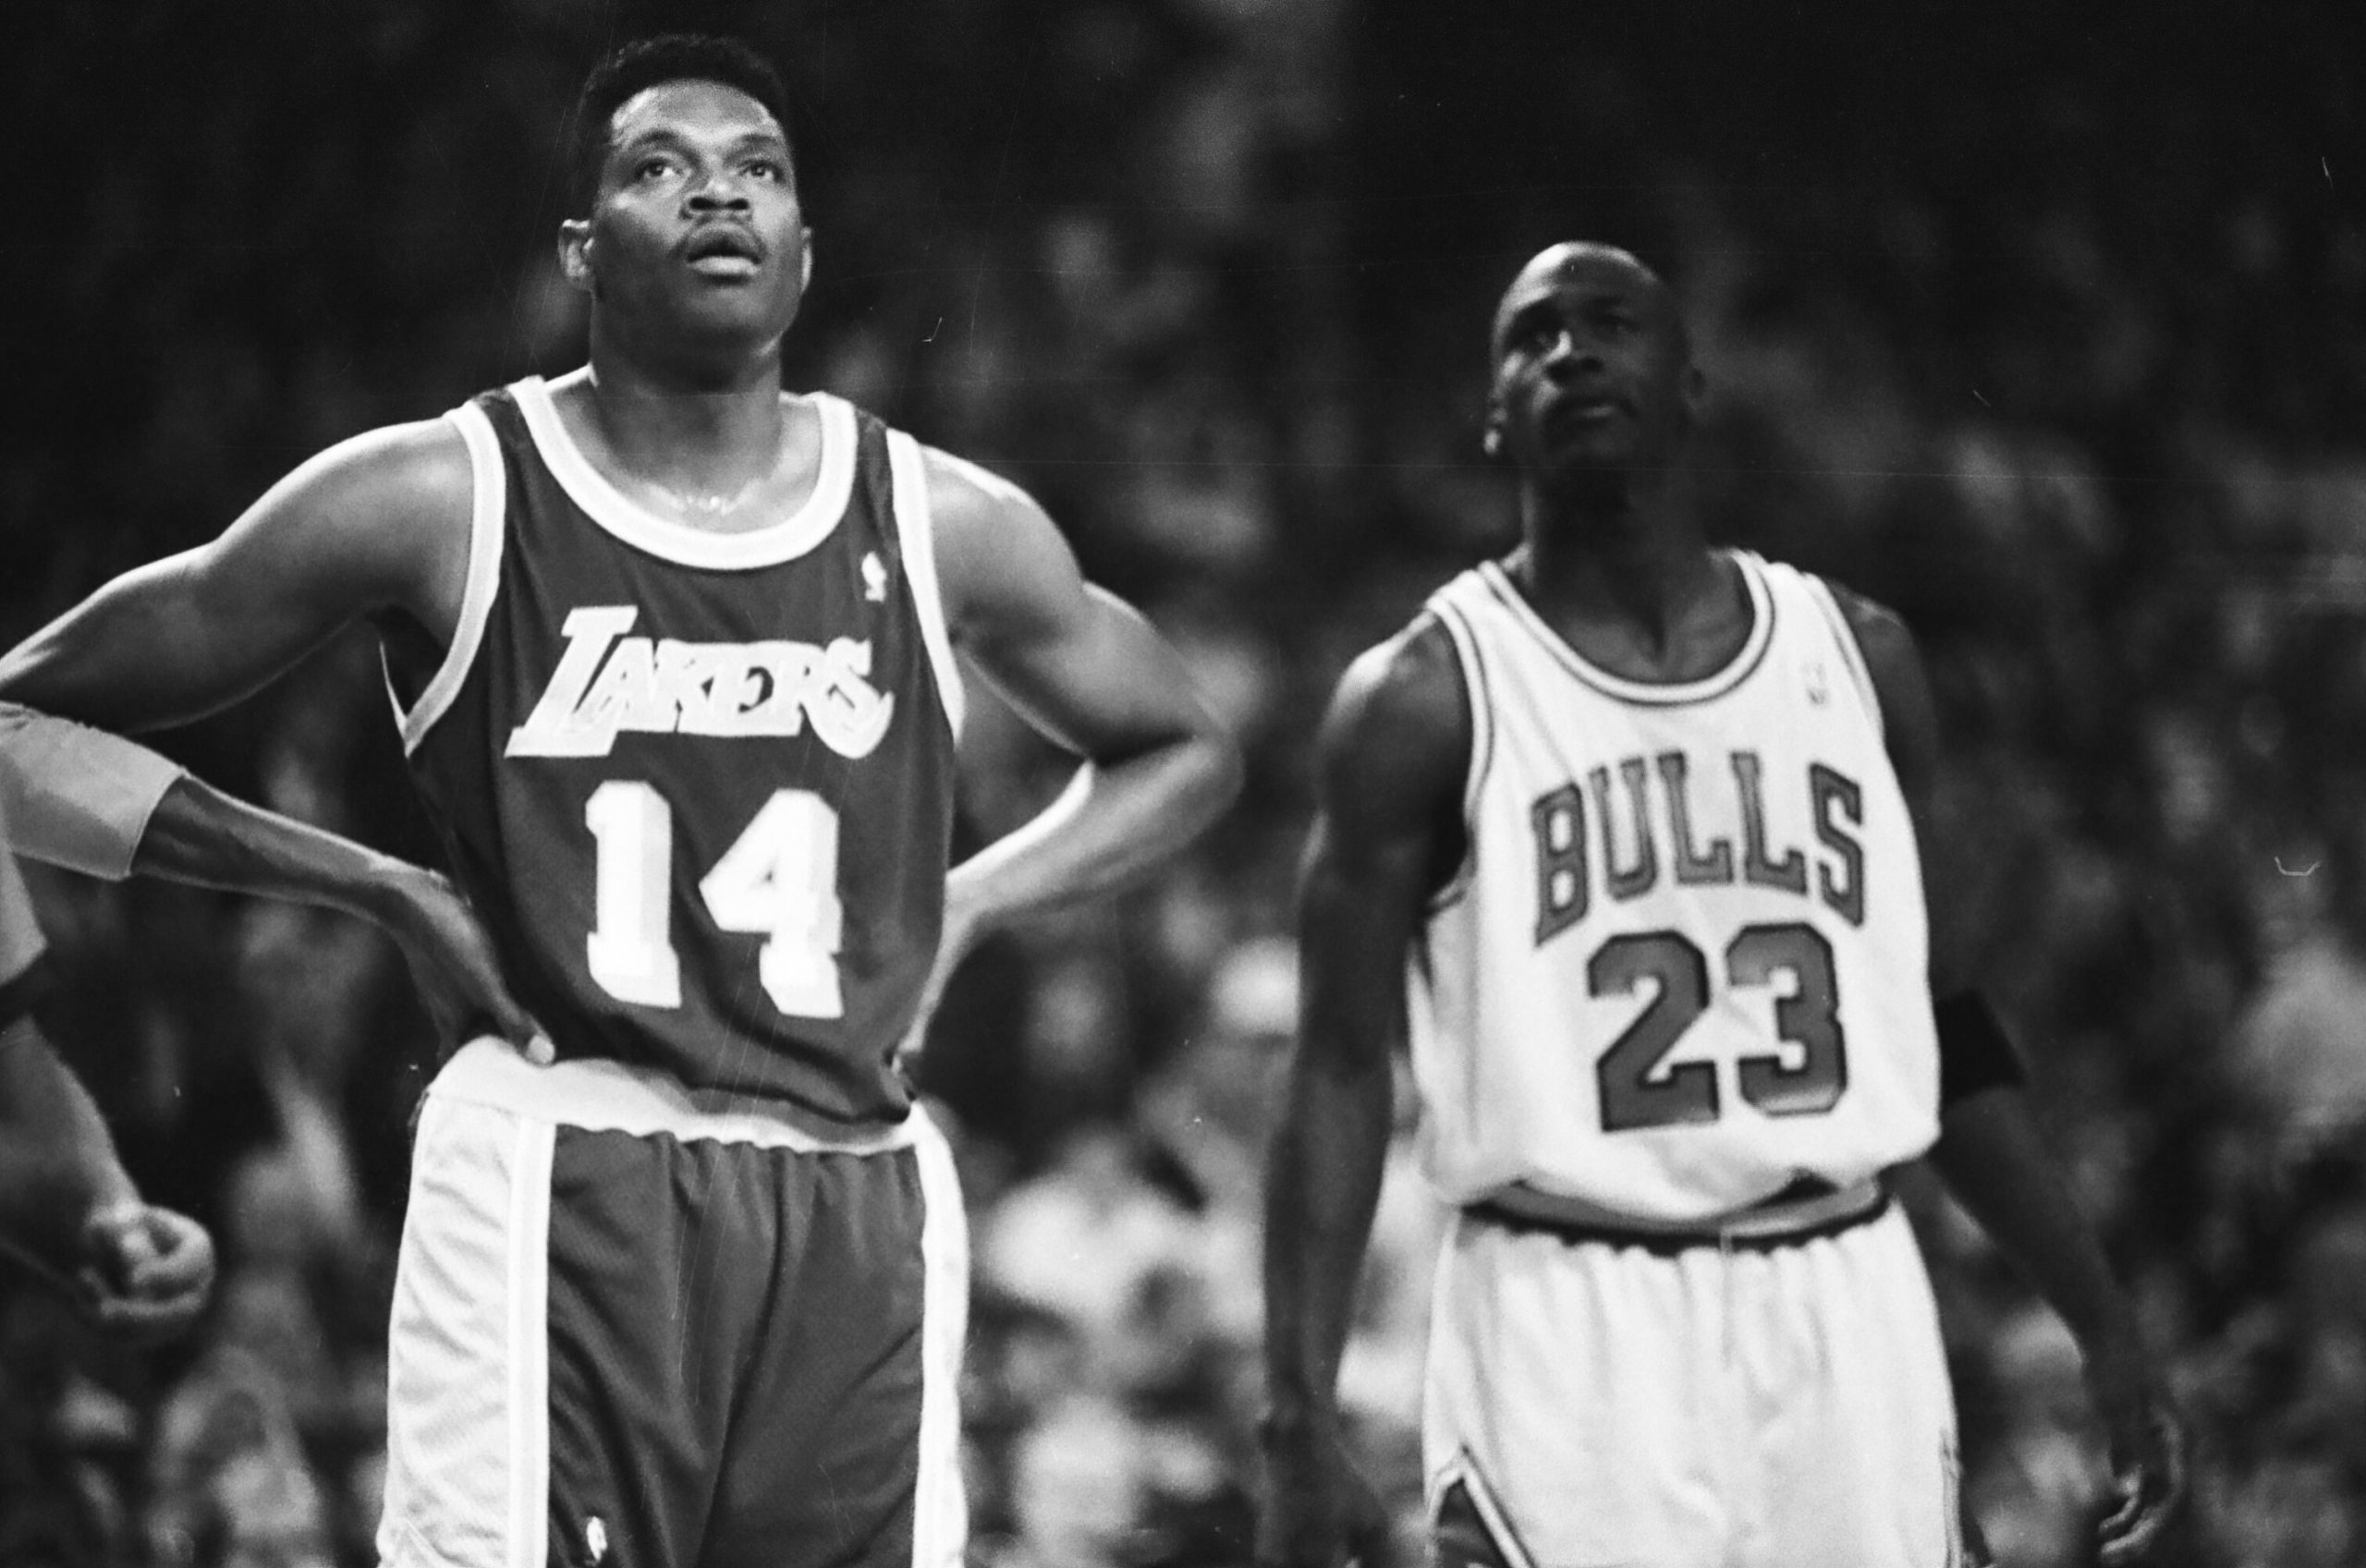 Sam Perkins and Michael Jordan stand next to each other during the game